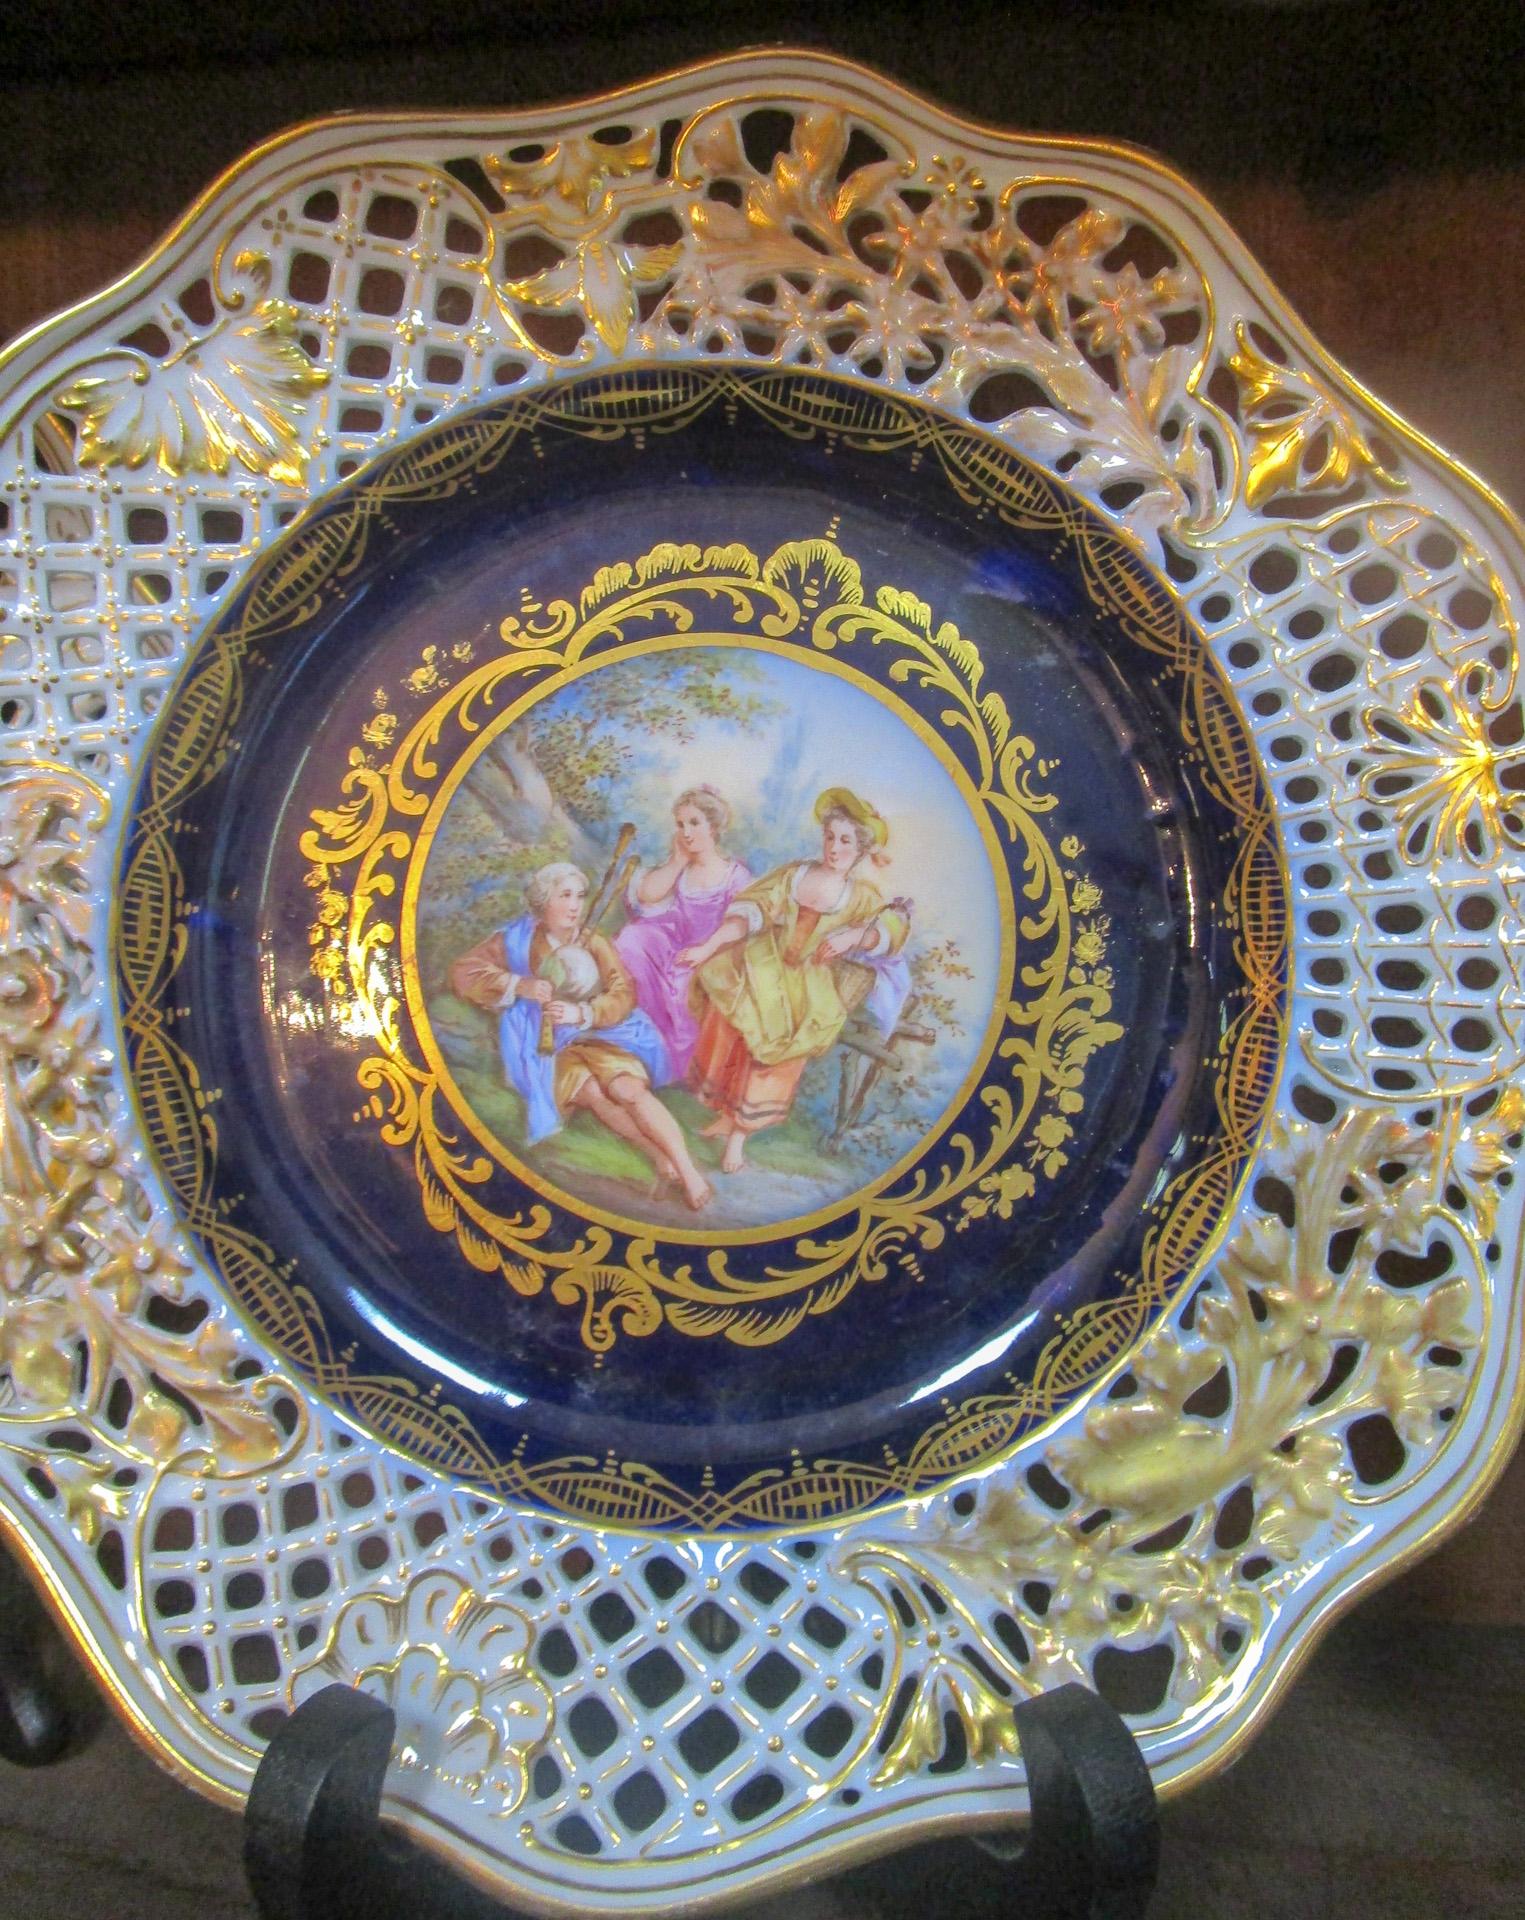 8 Meissen Germany 19thc Cobalt Reticulated Porcelain Plates with Courting Scenes For Sale 2